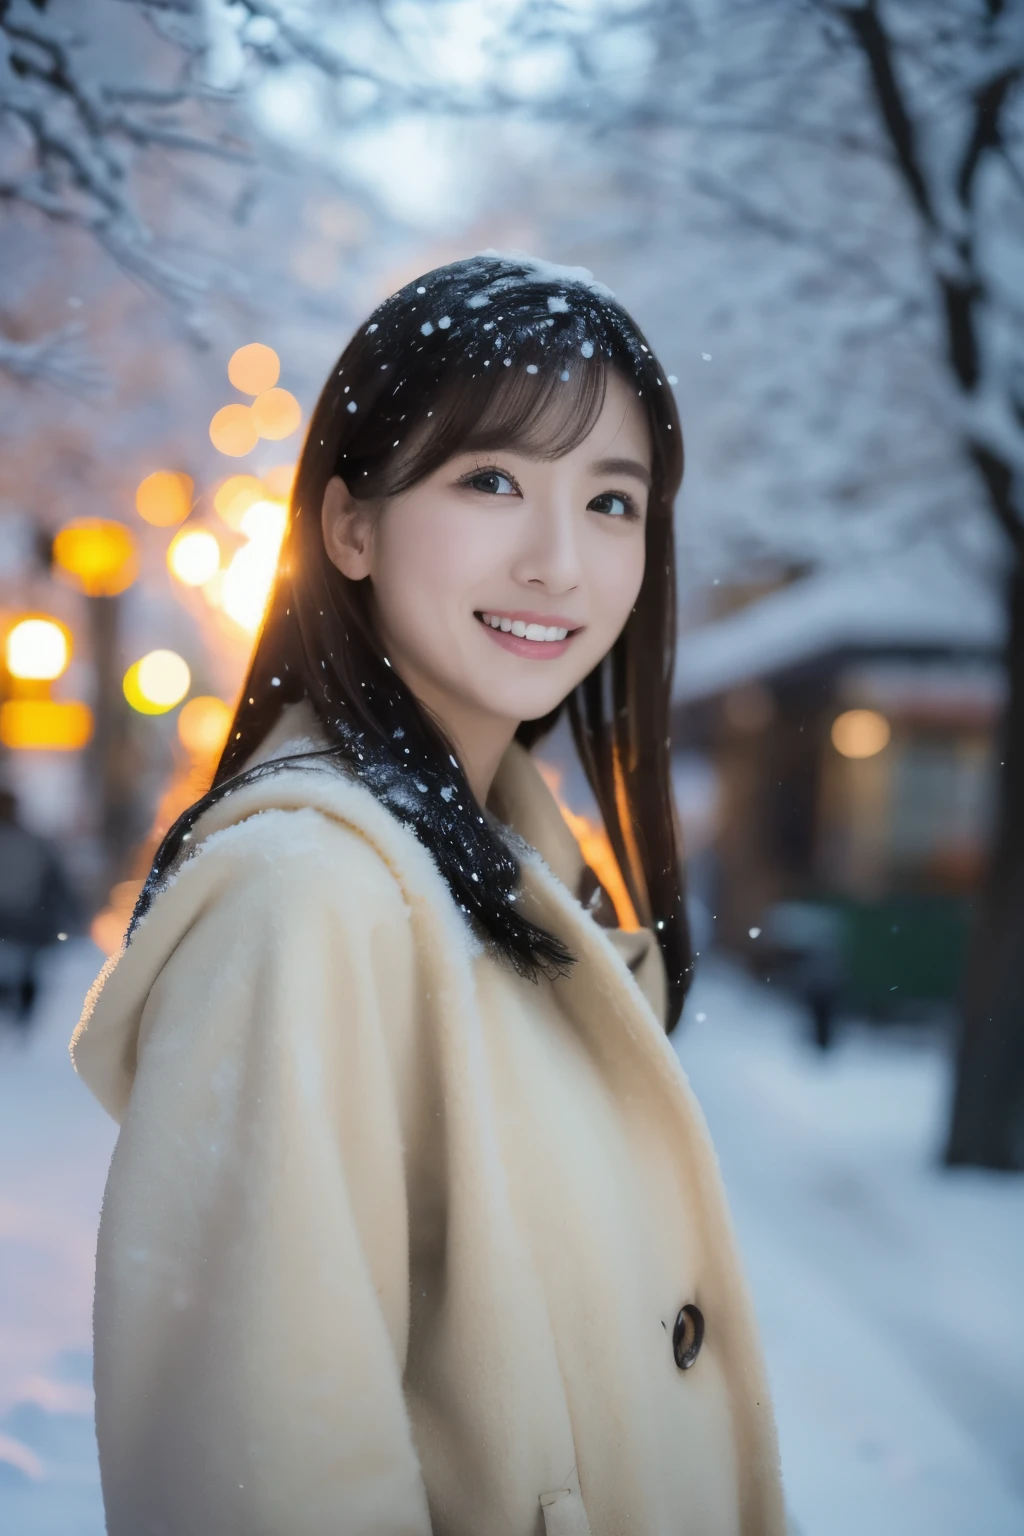 1girl in, (Beige coat, Green muffler:1.2), (Raw photo, Best Quality), (Realistic, Photorealsitic:1.4), masutepiece, Extremely delicate and beautiful, Extremely detailed, 2k wallpaper, amazing, finely detail, the Extremely Detailed CG Unity 8K Wallpapers, Ultra-detailed, hight resolution, Soft light, Beautiful detailed girl, extremely detailed eye and face, beautiful detailed nose, Beautiful detailed eyes, Cinematic lighting, Illuminations coloring the city on a snowy night, (Illumination of street trees covered with snow like frost-covered trees:1.4), Snowy landscape, It's snowing, snow fell in my hair, Diffuse reflection of light, α80mmF1.8, Perfect Anatomy, Slender body, Small, Smiling